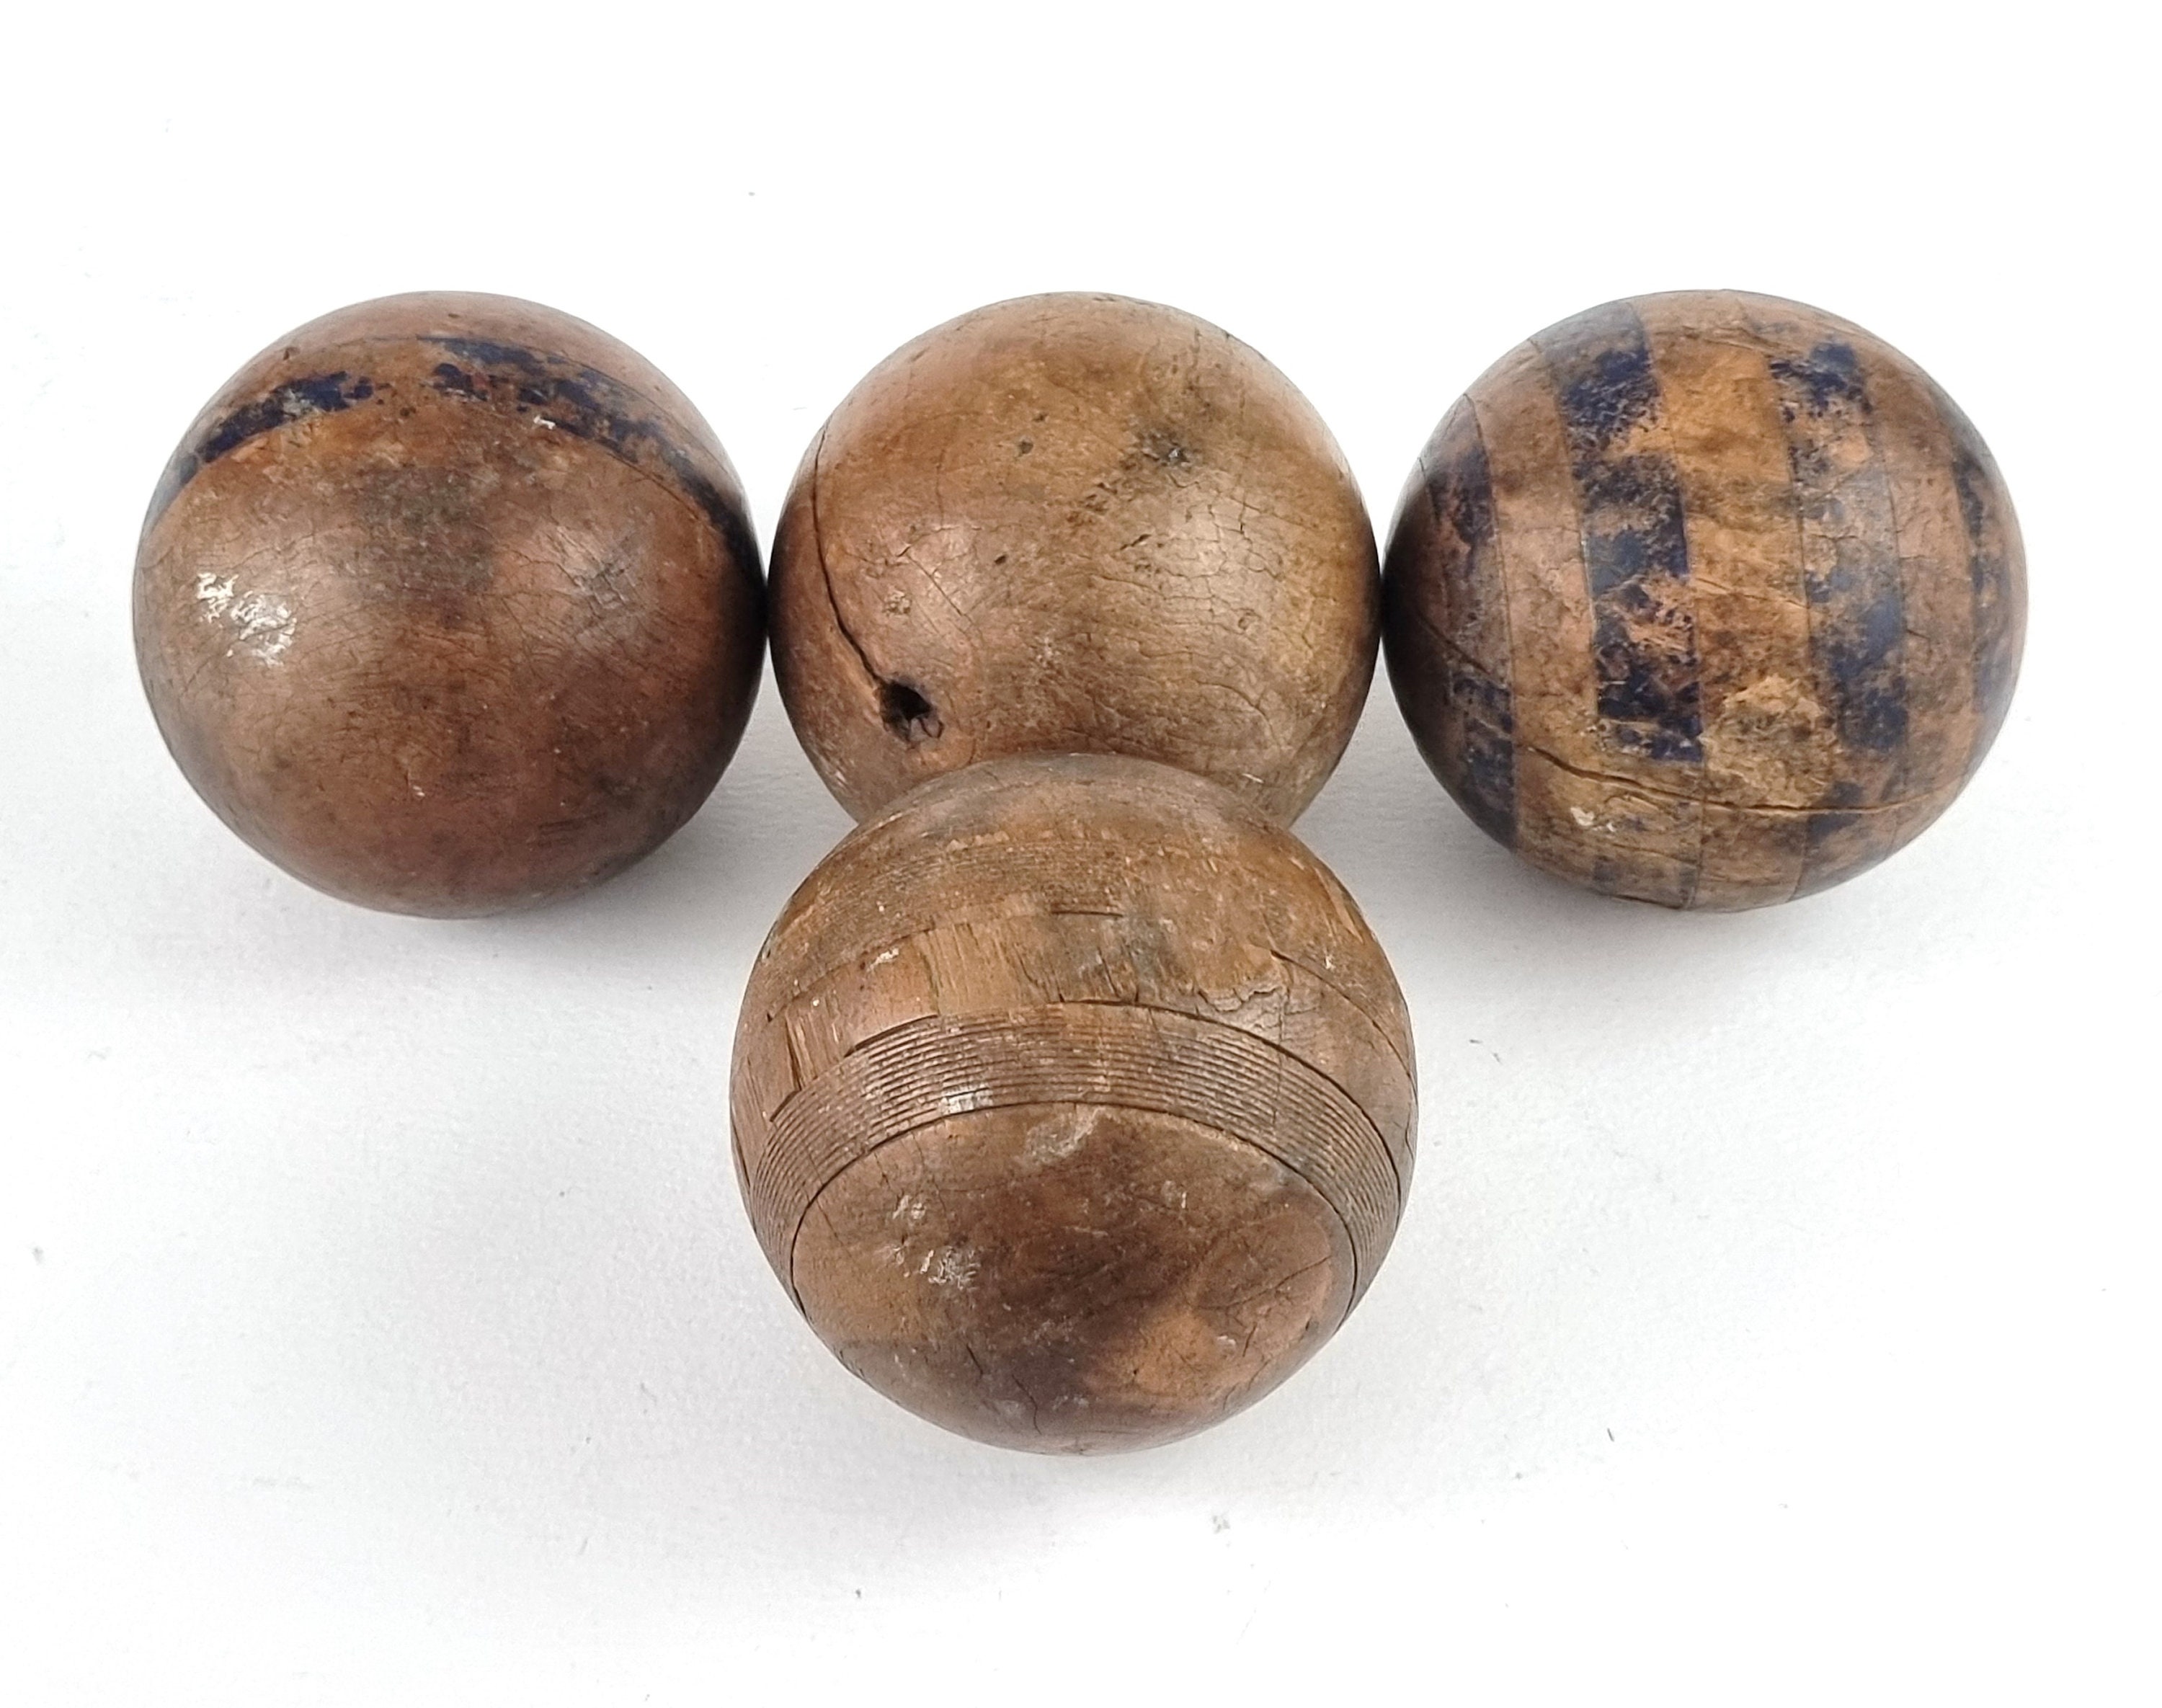 1-1/2 inch Wooden Round Balls, Bag of 50 Unfinished Wood Round Balls,  Hardwood Birch Sphere Orbs for Crafts and DIY Projects, Woodworking (1-1/2  inch